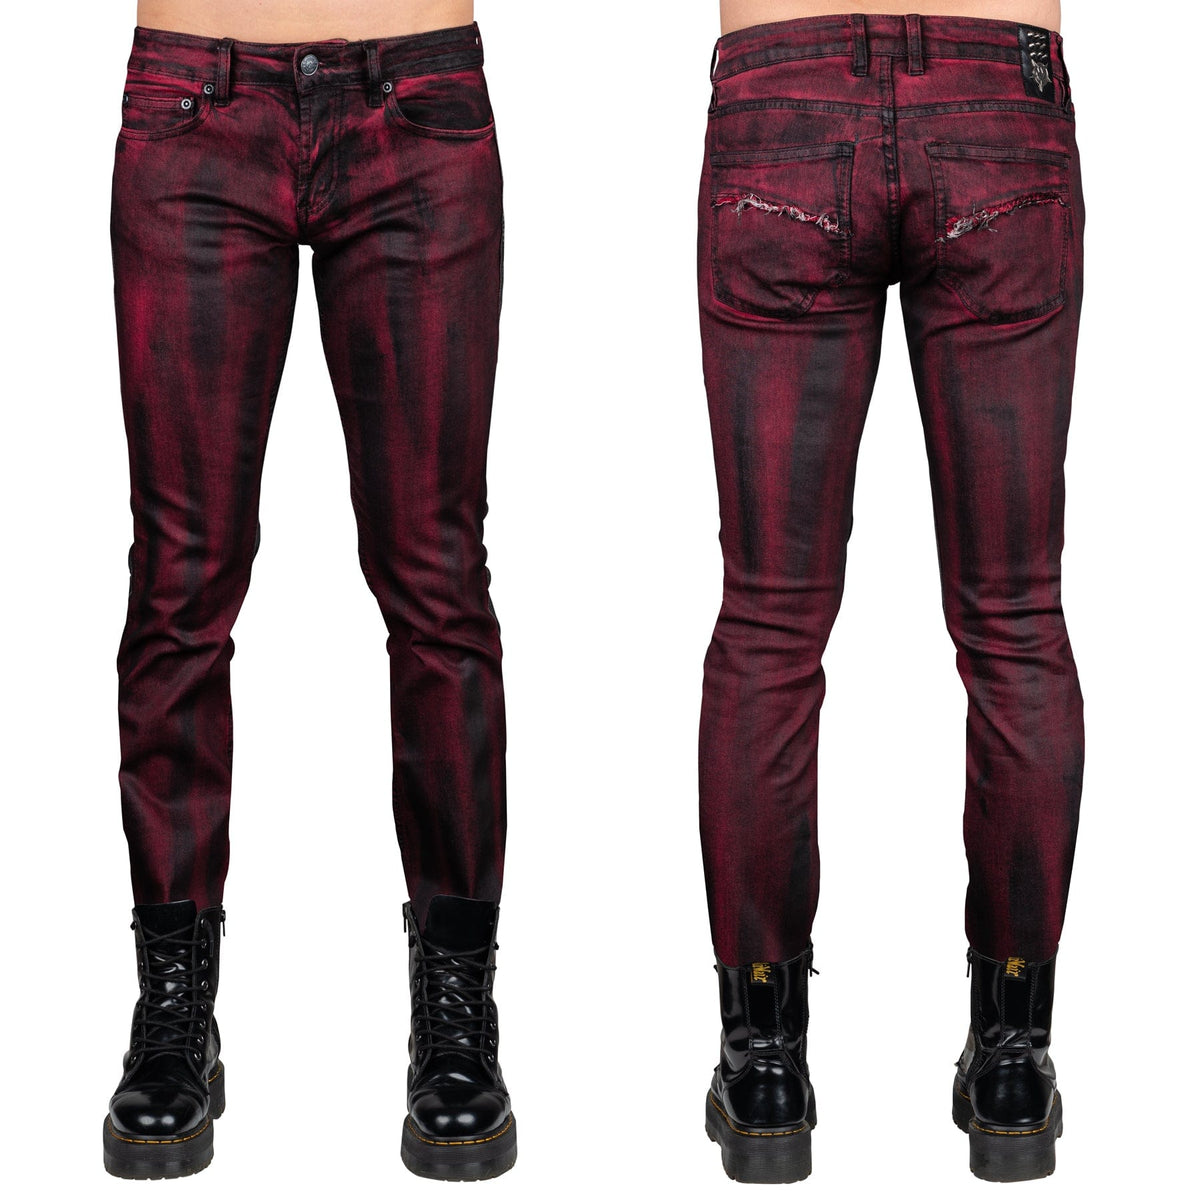 All Access Collection Pants Rampager Coated Jeans - Crimson